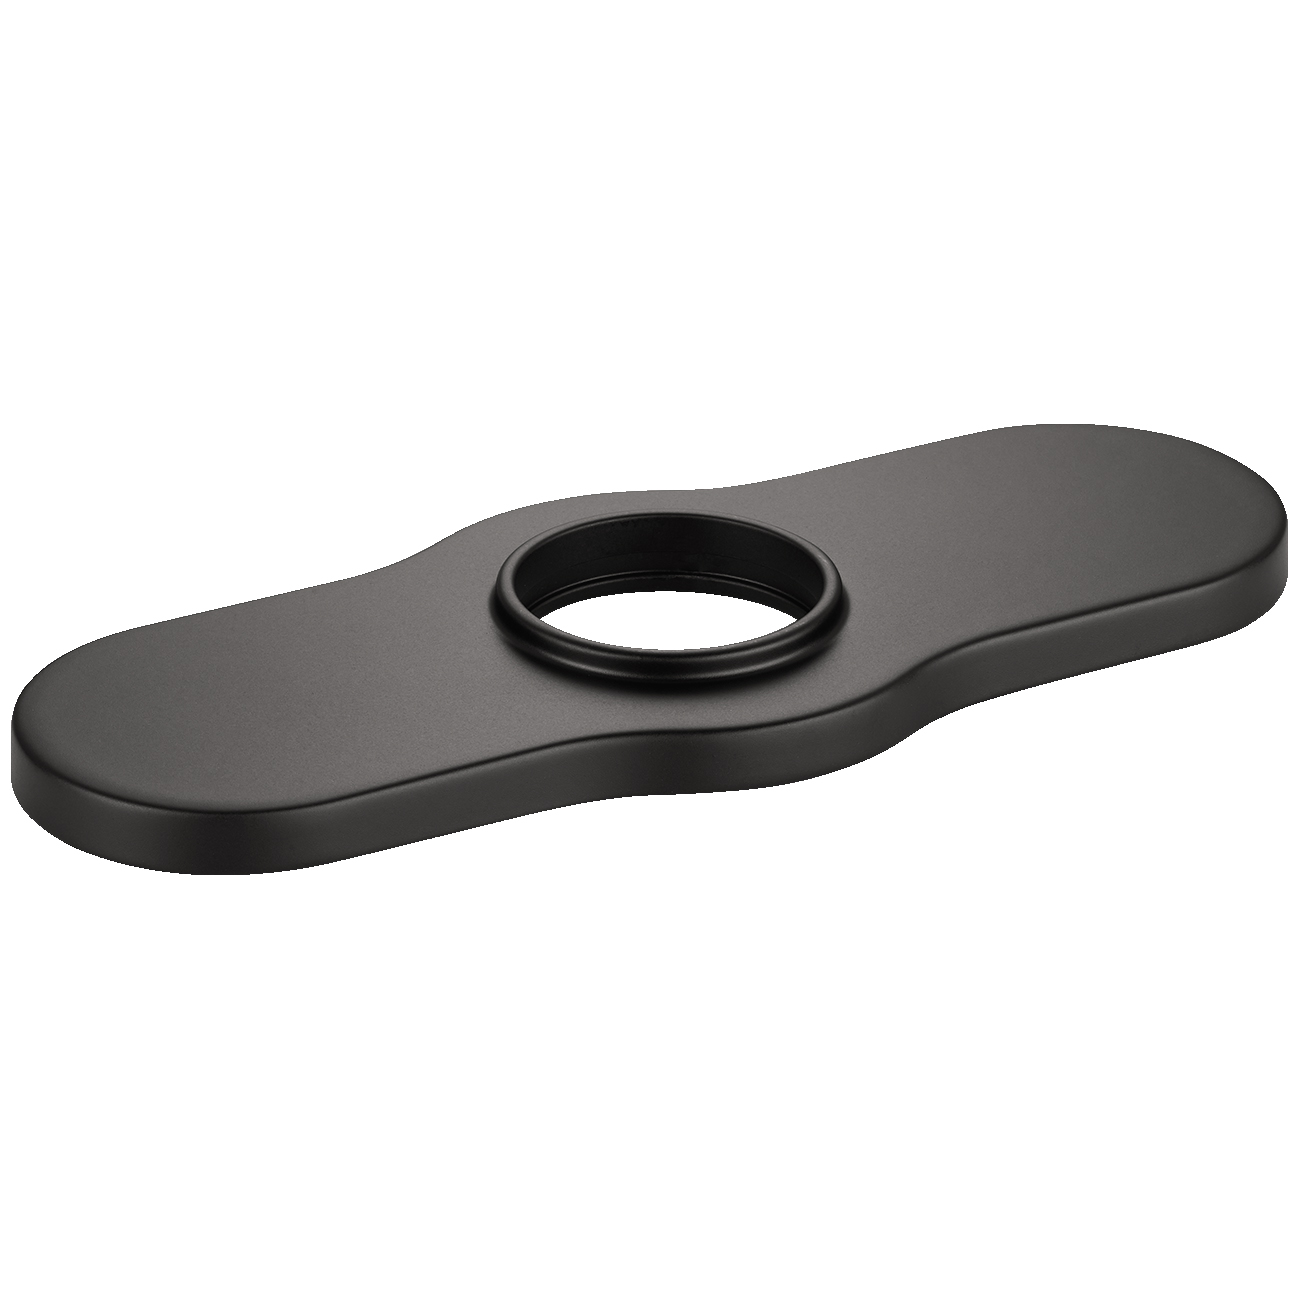 04778670 Joleena 6 in. Base Plate for Single-Hole Faucets, Matte Black